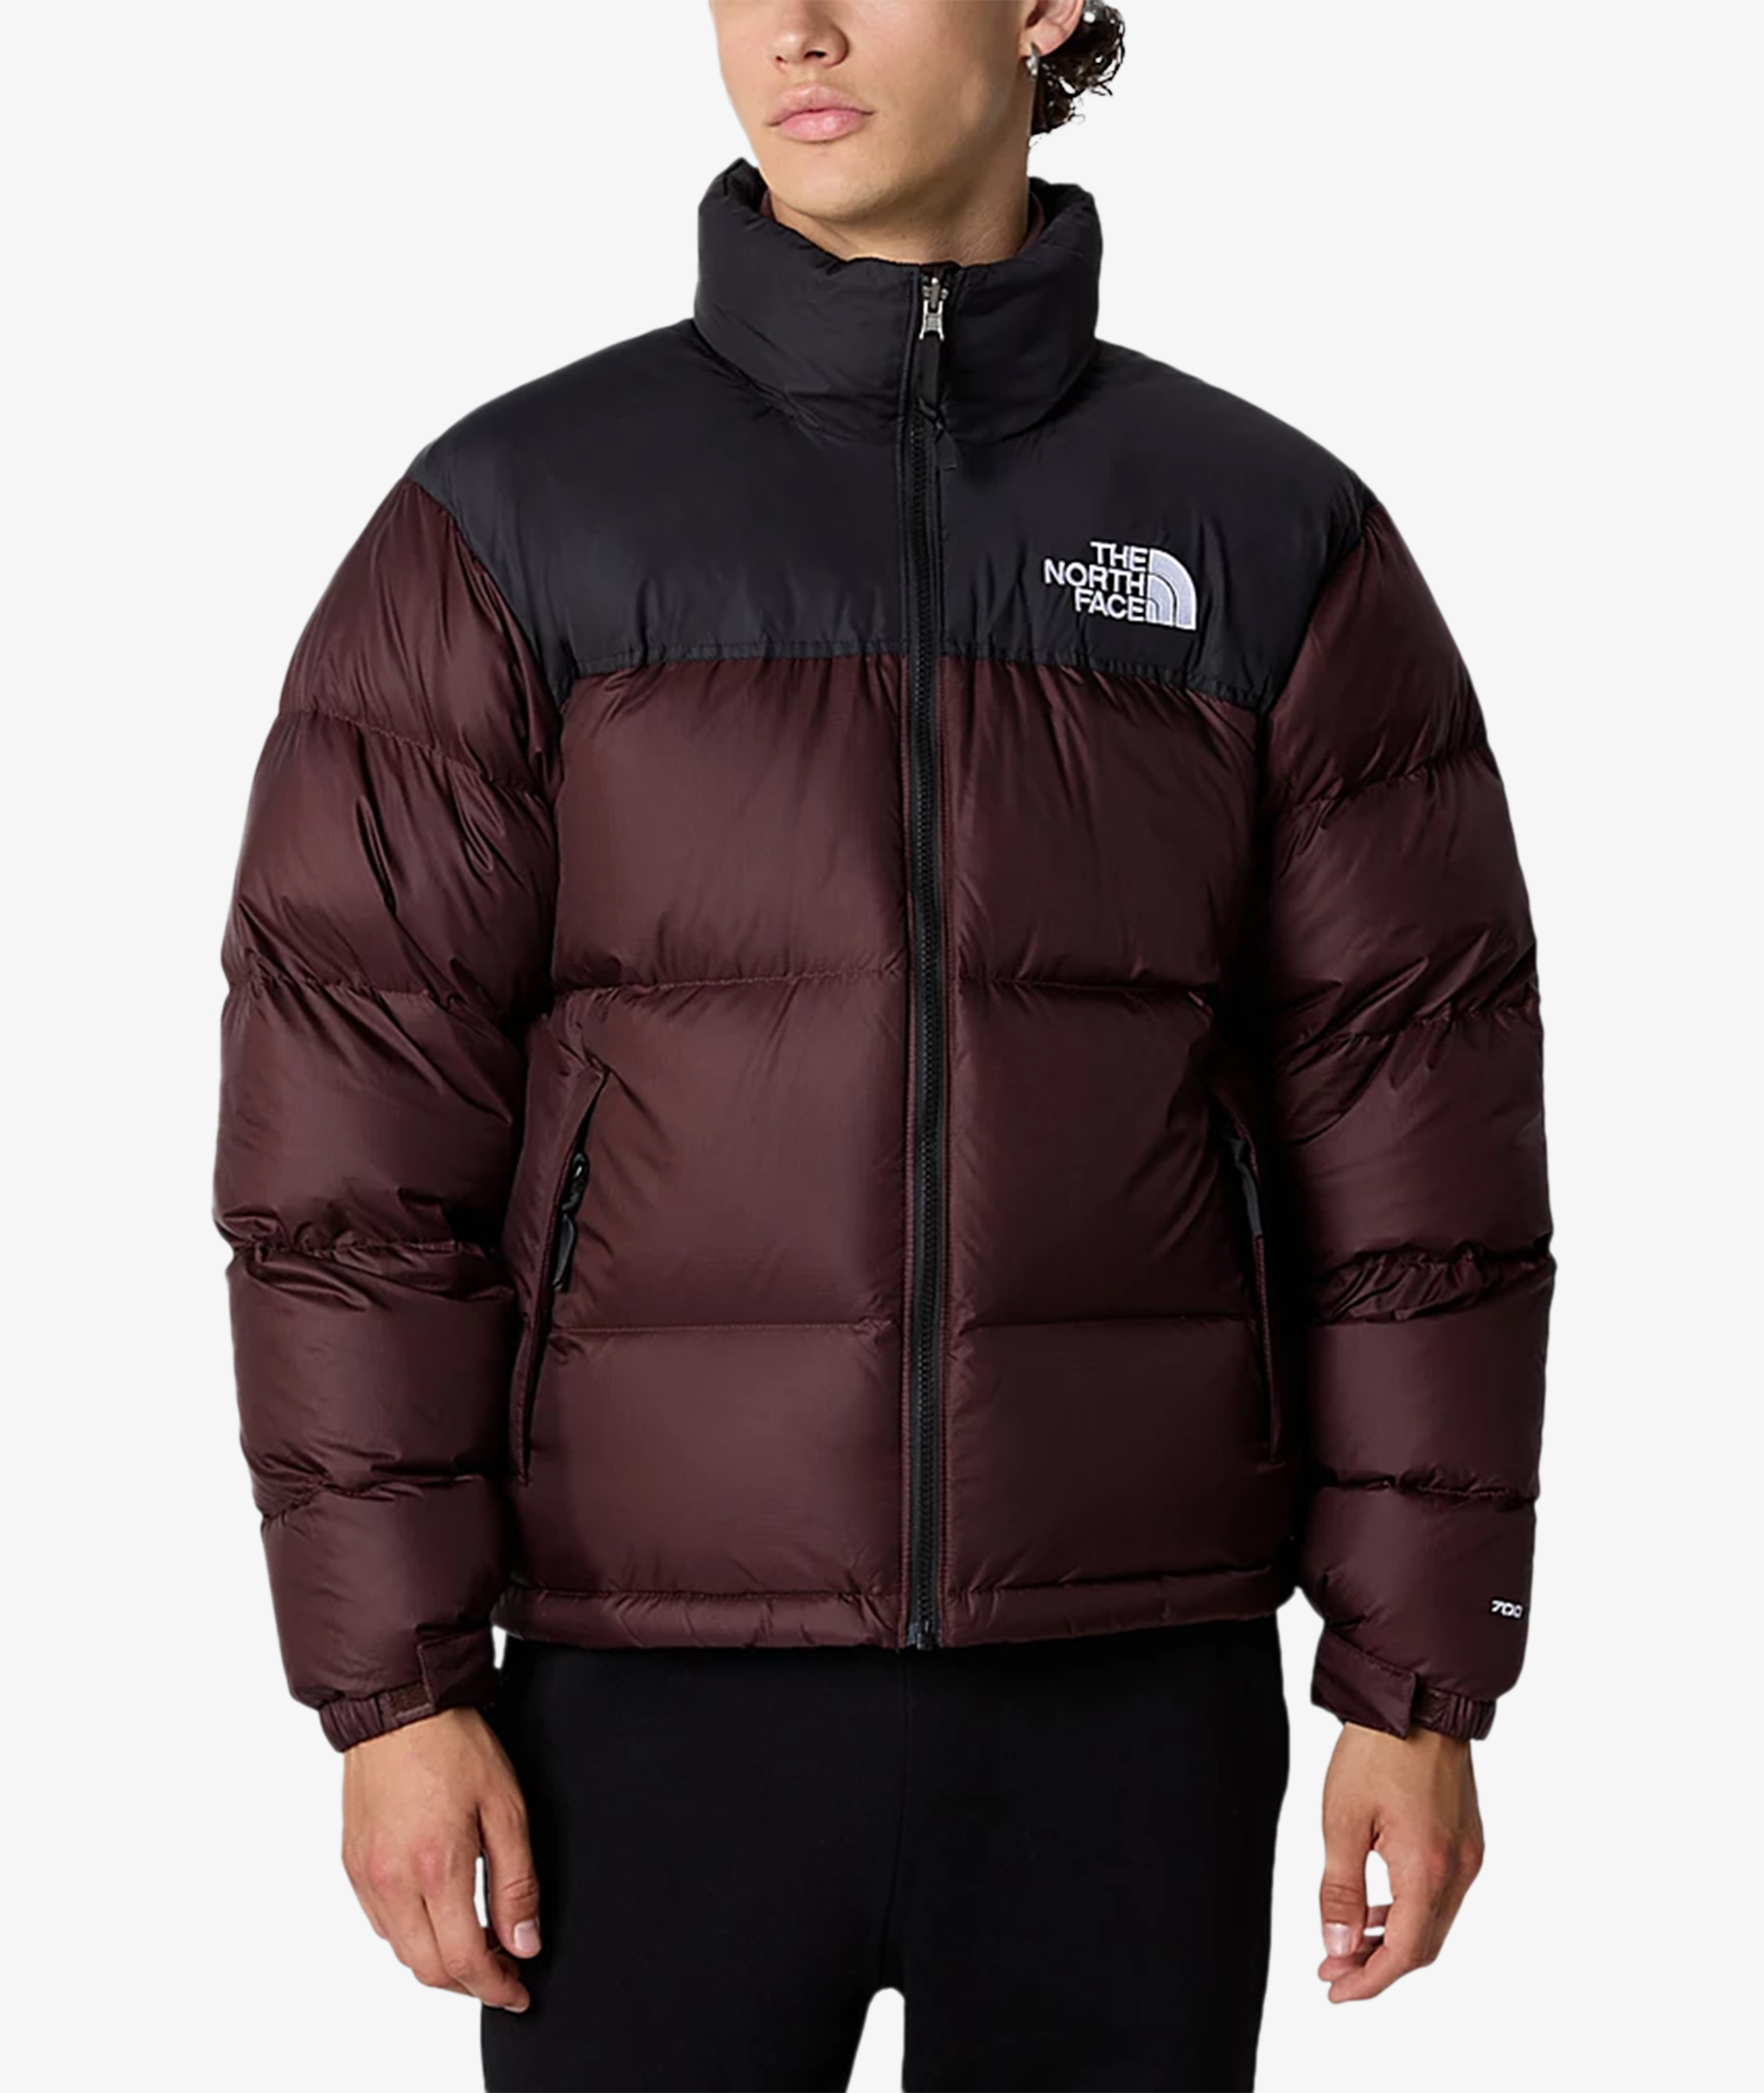 Norse Store | Shipping Worldwide - The North Face M 96 RETRO